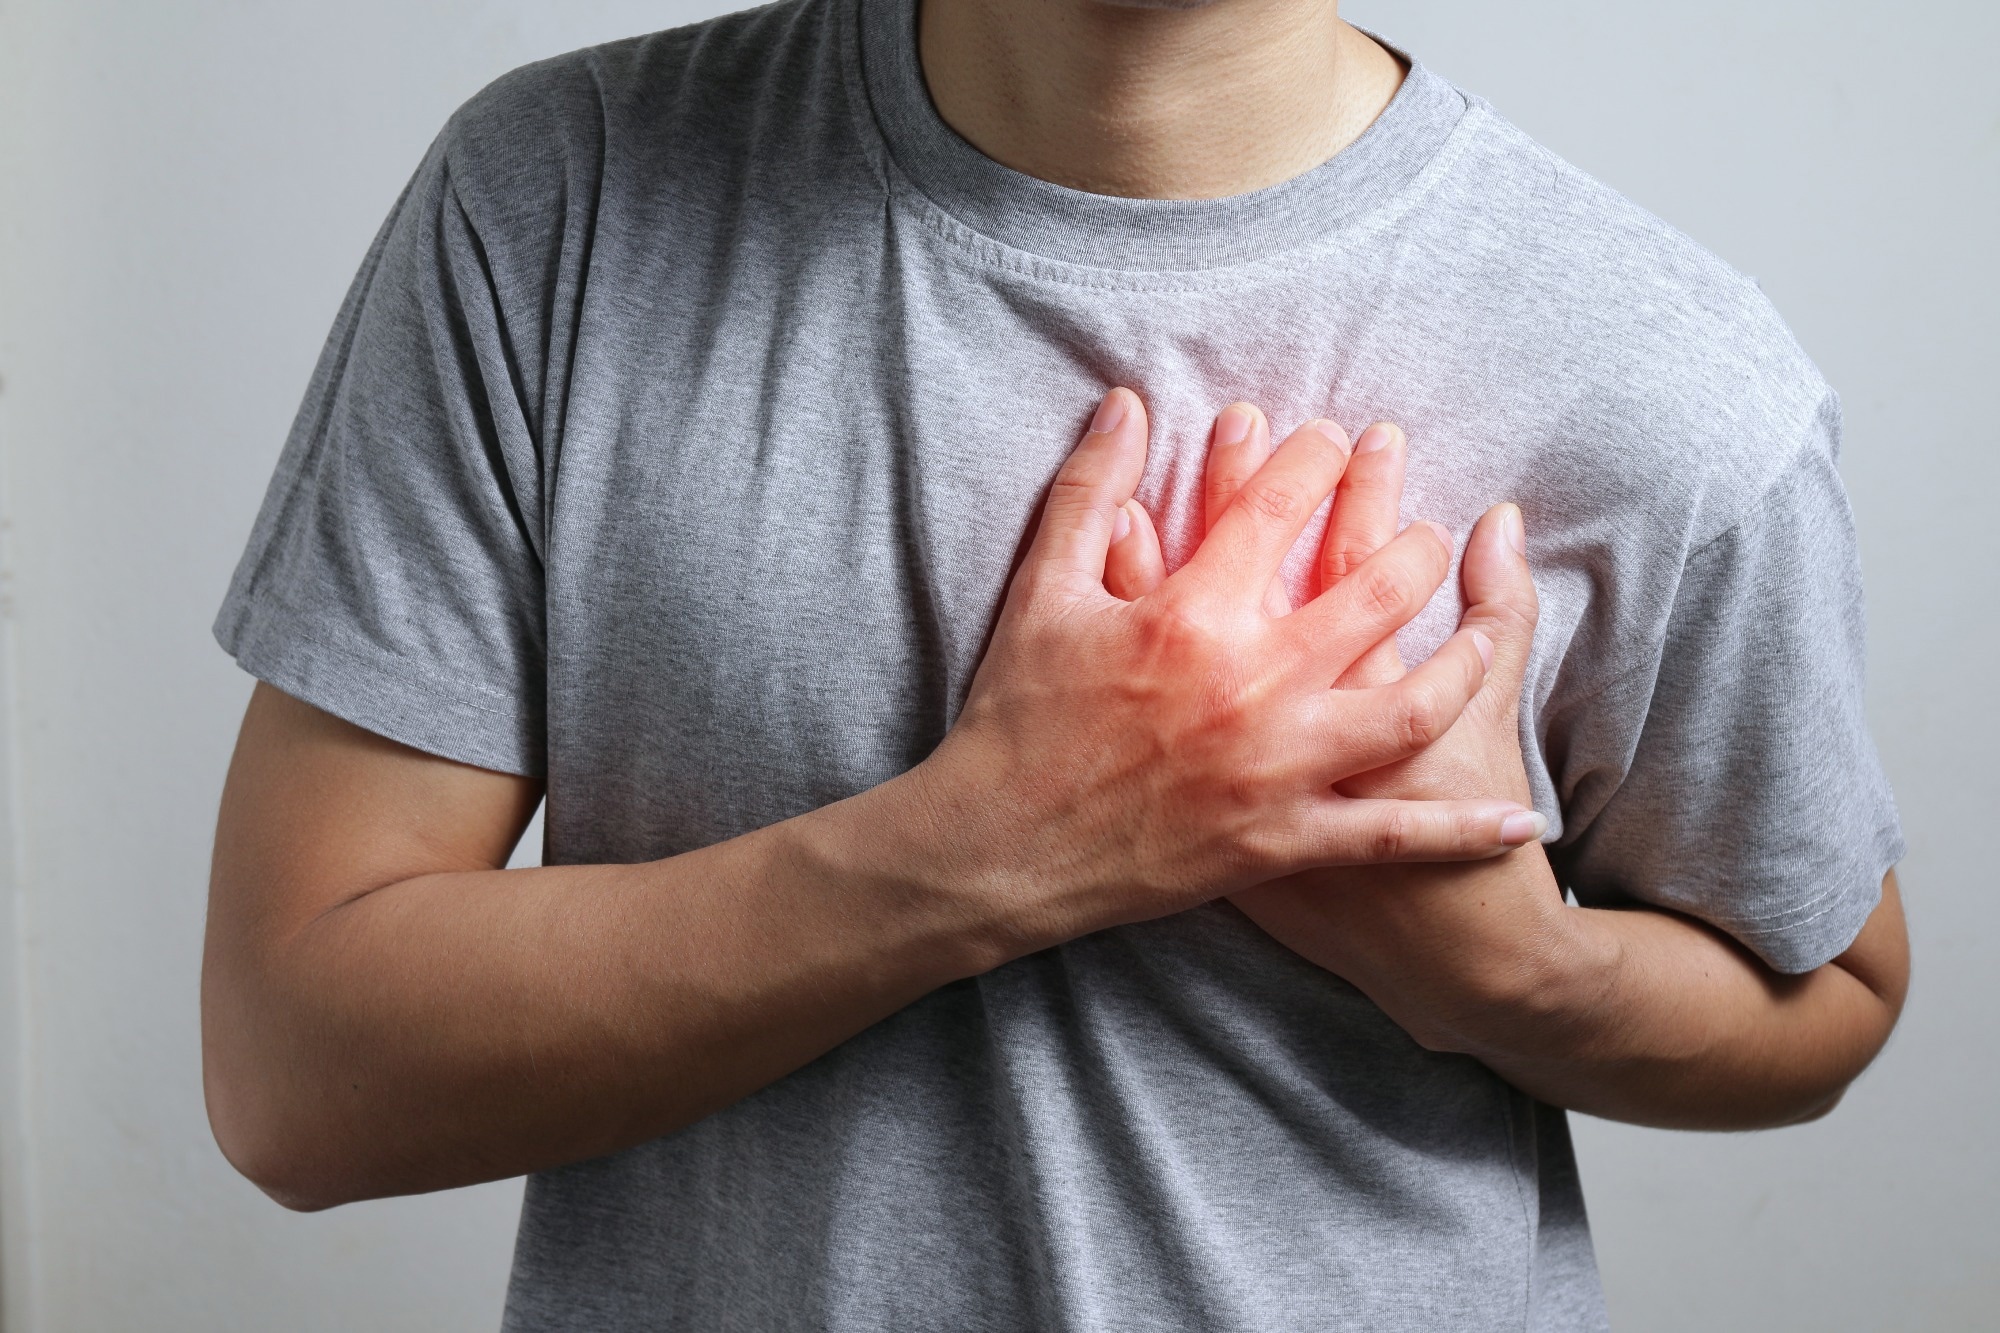 Study: Association of Direct Oral Anticoagulation Management Strategies With Clinical Outcomes for Adults With Atrial Fibrillation. Image Credit: NakharinT/Shutterstock.com